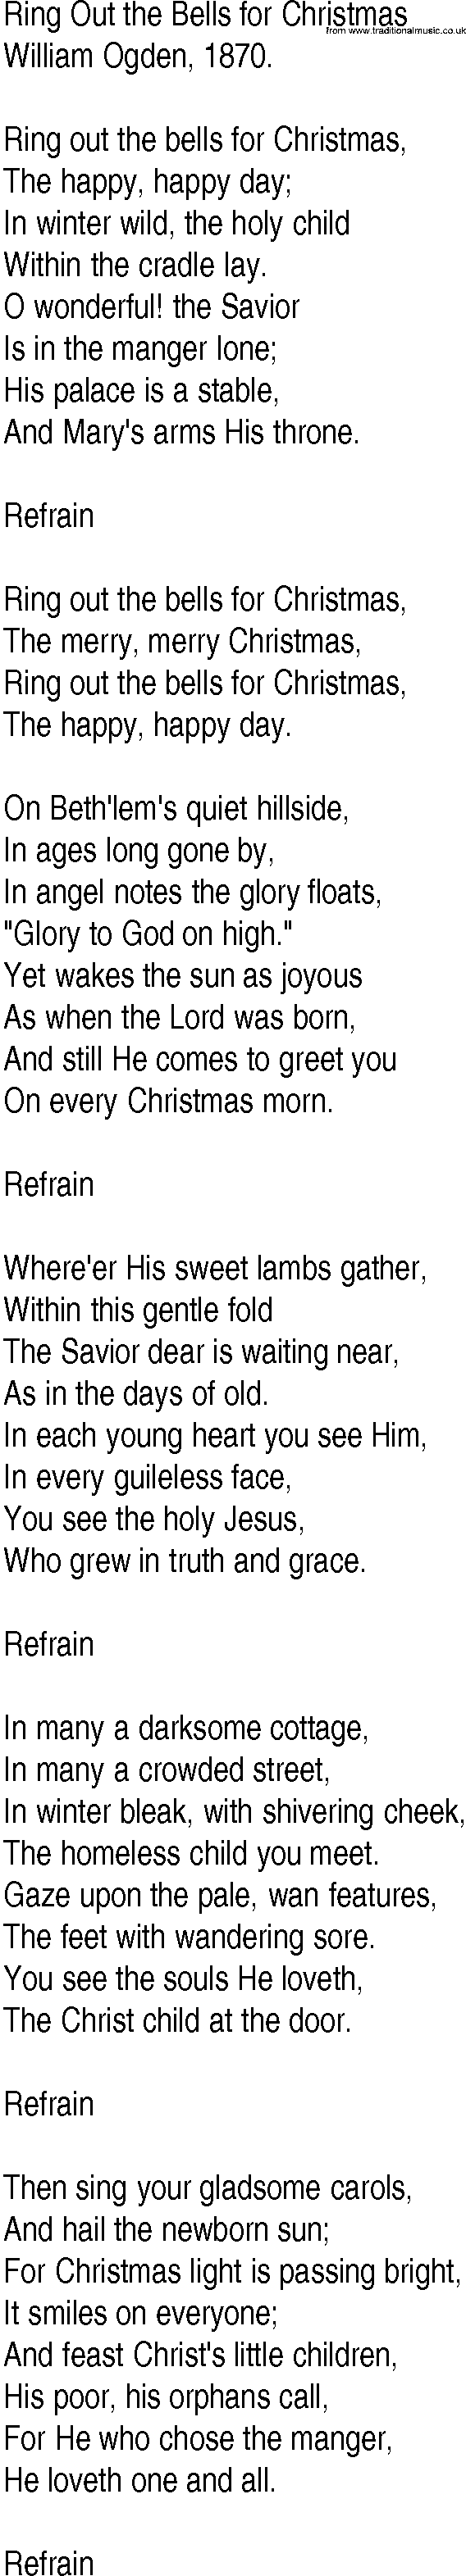 Hymn and Gospel Song: Ring Out the Bells for Christmas by William Ogden lyrics